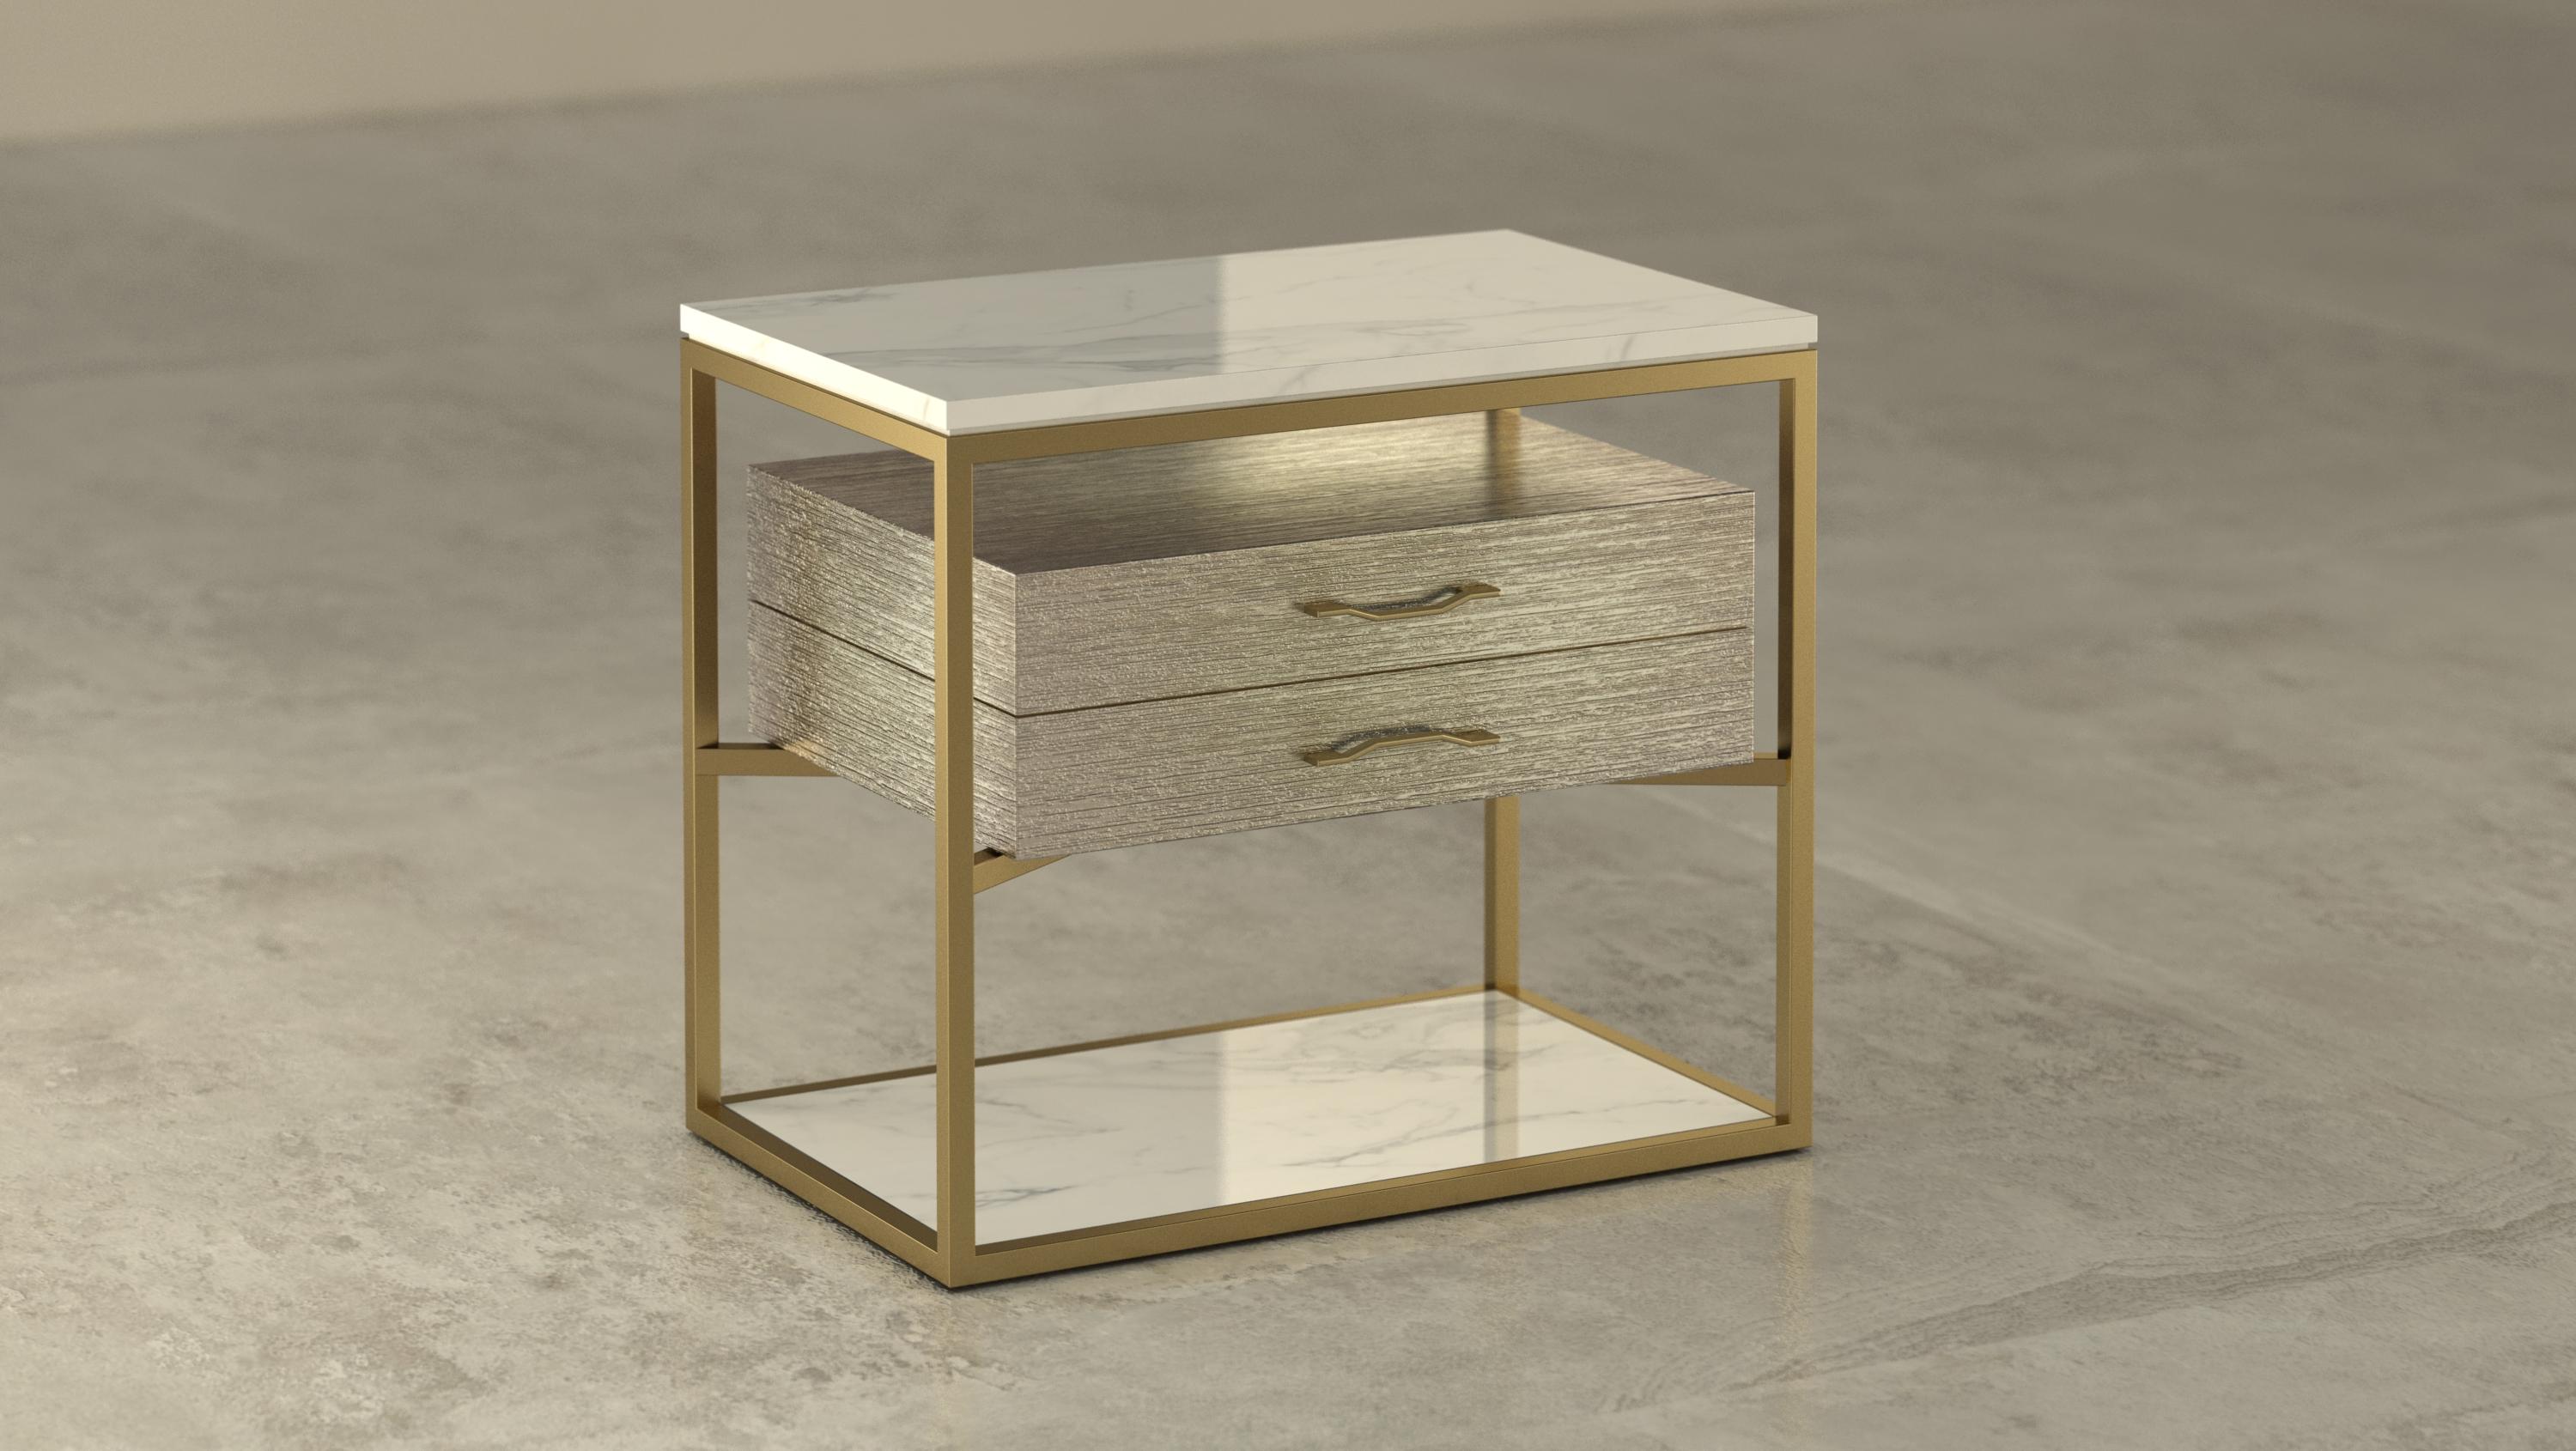 - Bedside table composed in marble, wood and metal, created by Michele Arcarese Architect together with Giovannozzi.
- Top with groove, in marble type 